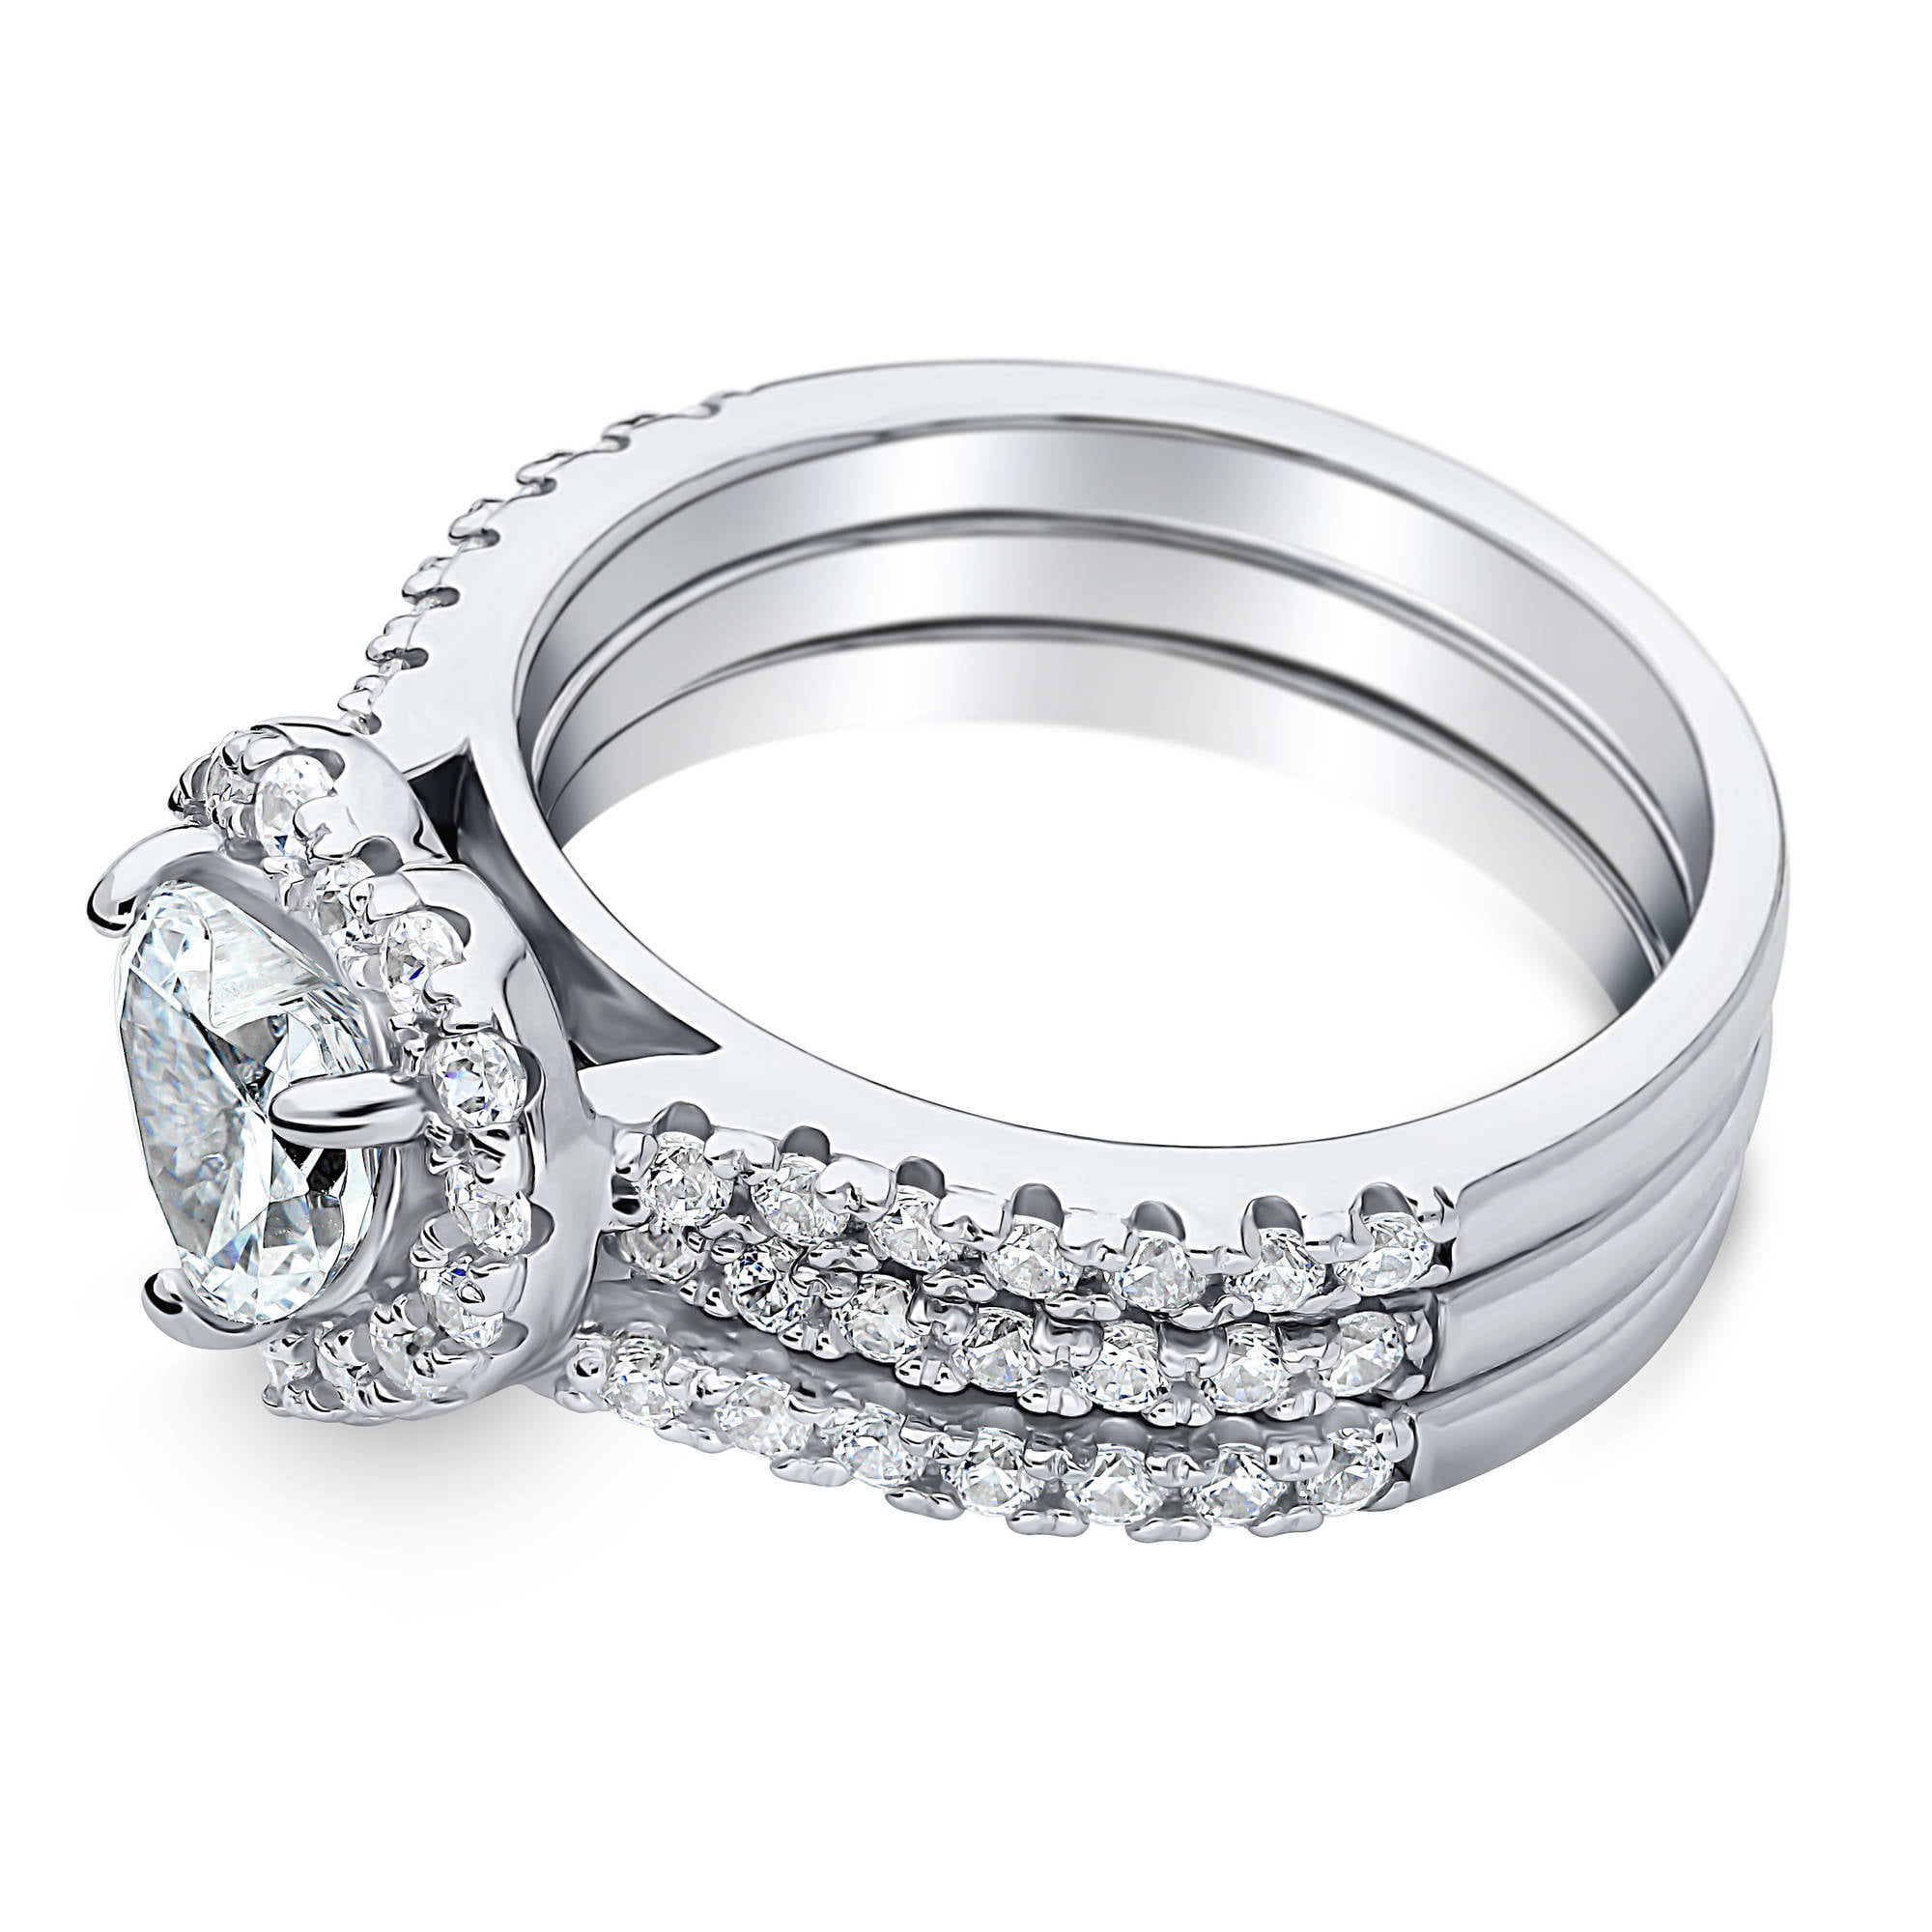 BERRICLE Sterling Silver Halo Wedding Engagement Rings Cubic